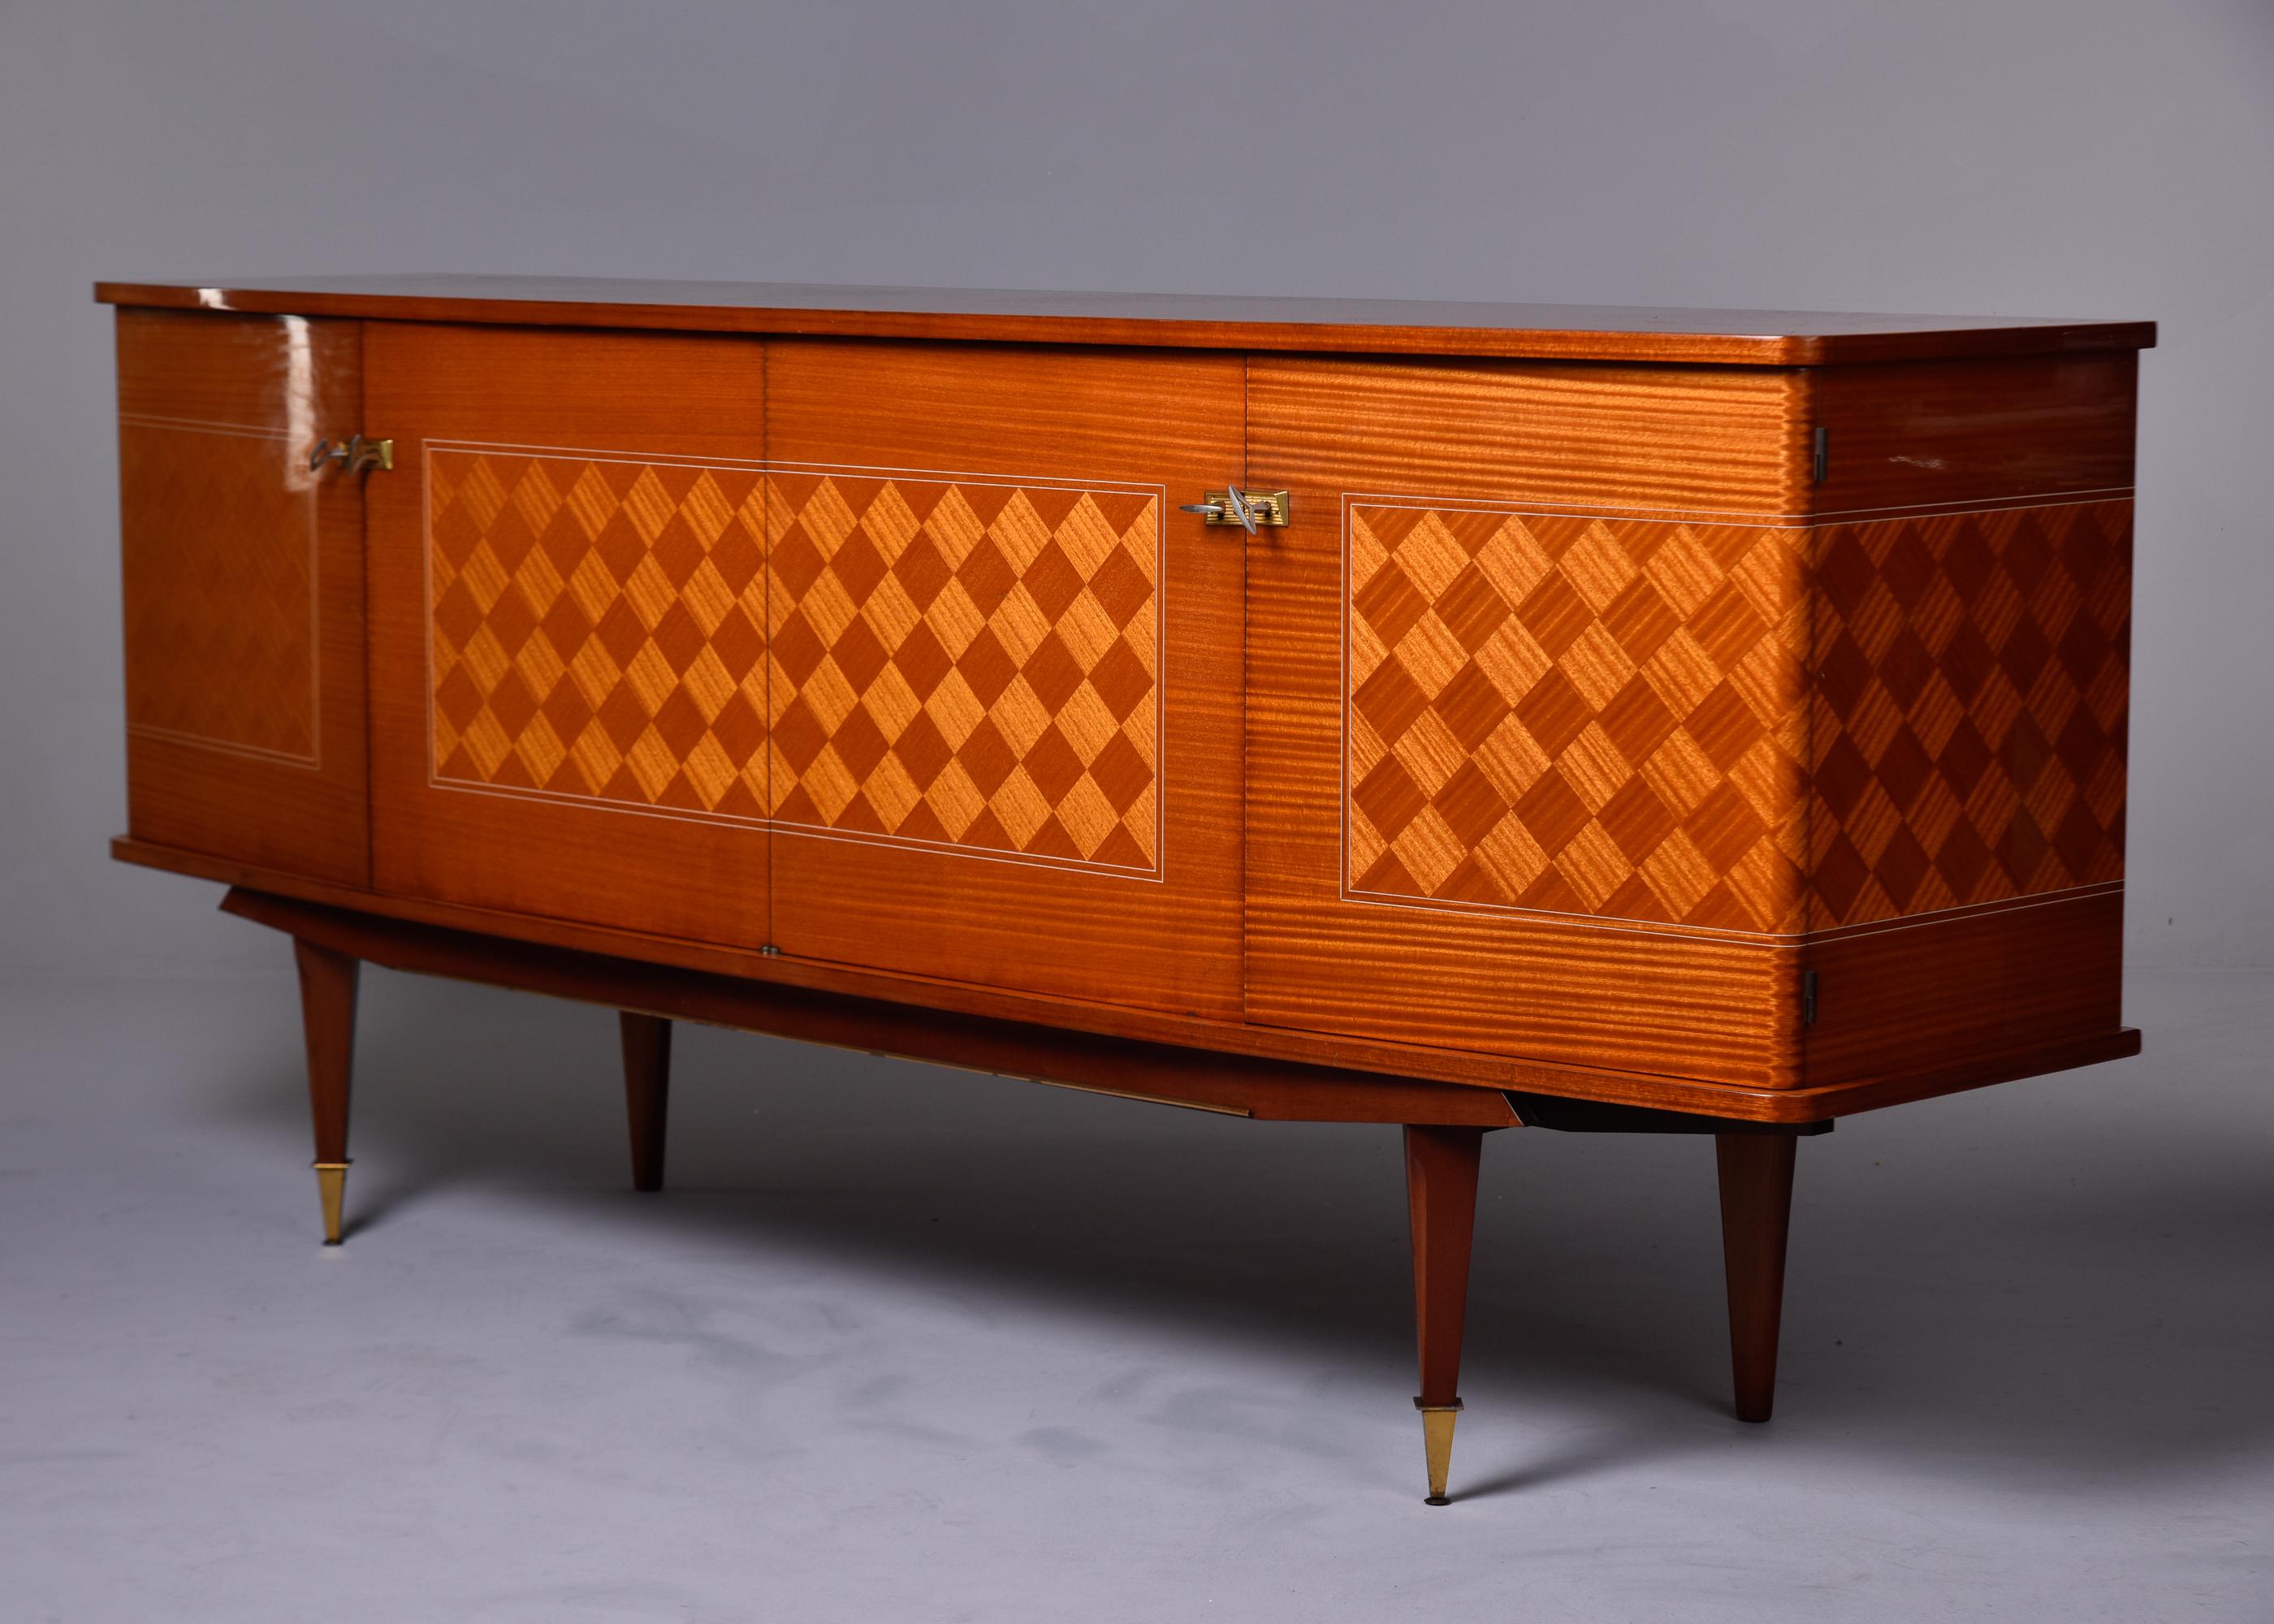 French Art Deco Mahogany Buffet Sideboard Credenza with Checkerboard Parquetry For Sale 3